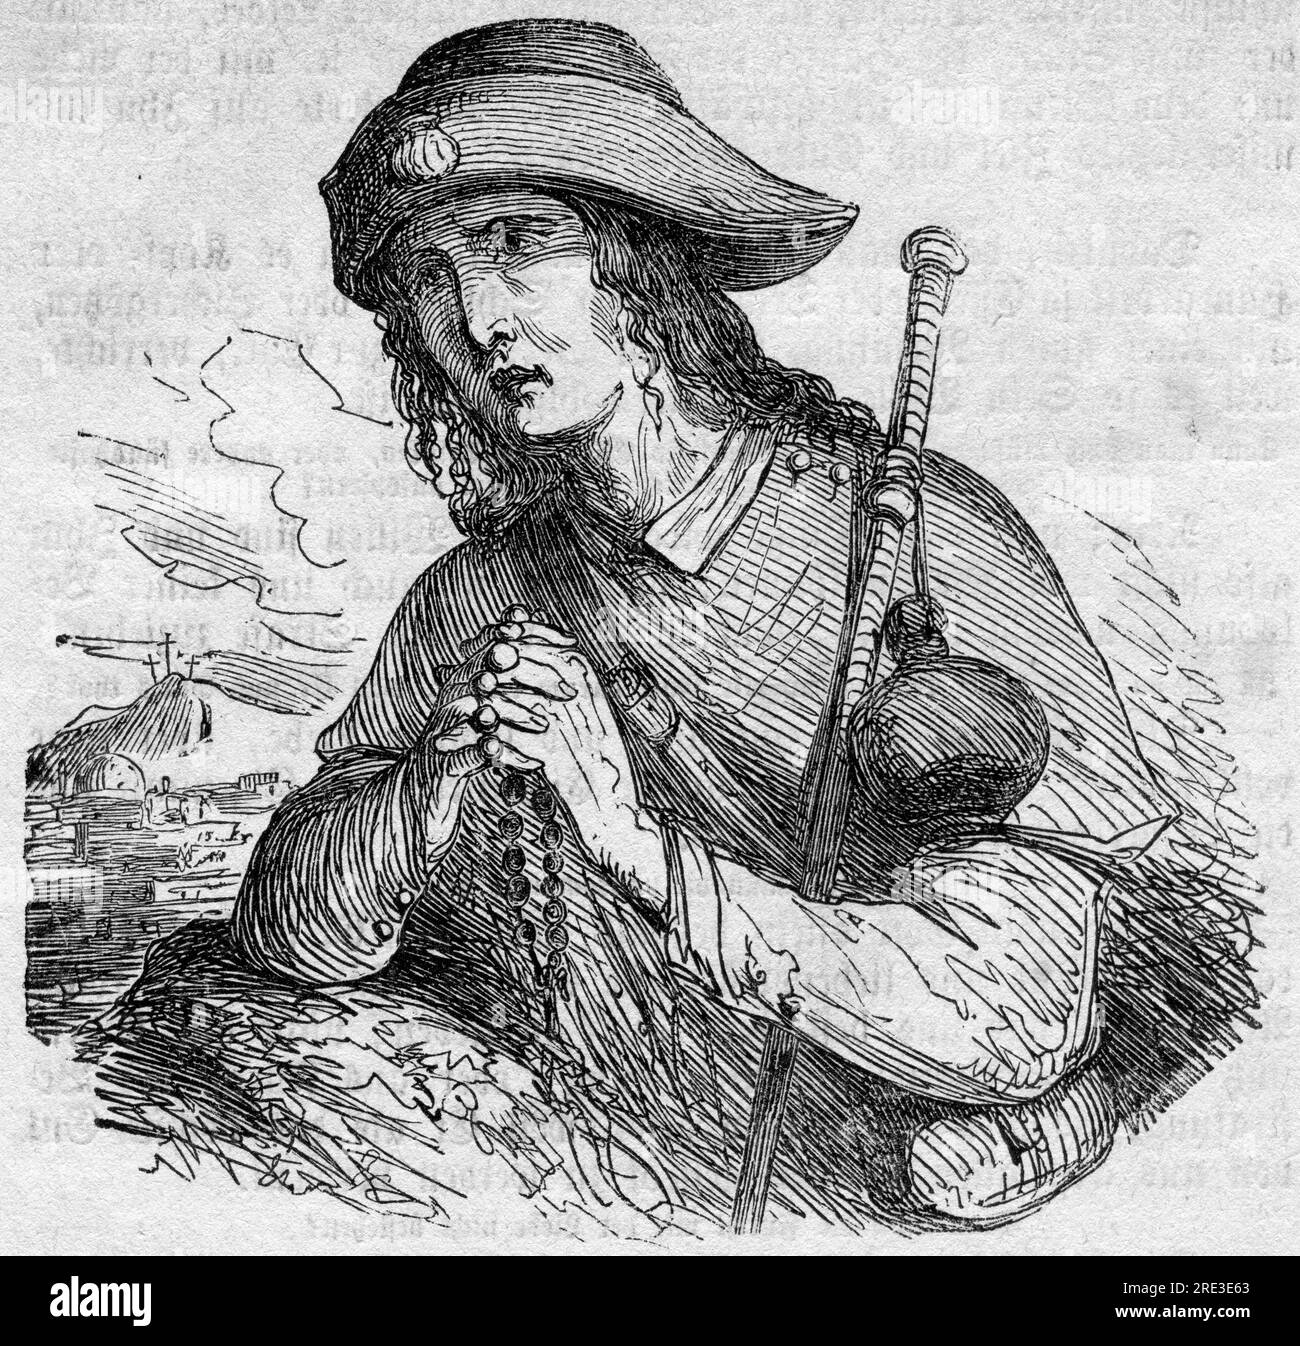 Willebold of Berkheim, + 1230, German pilgrim and Saint, wood engraving, 19th century, ARTIST'S COPYRIGHT HAS NOT TO BE CLEARED Stock Photo